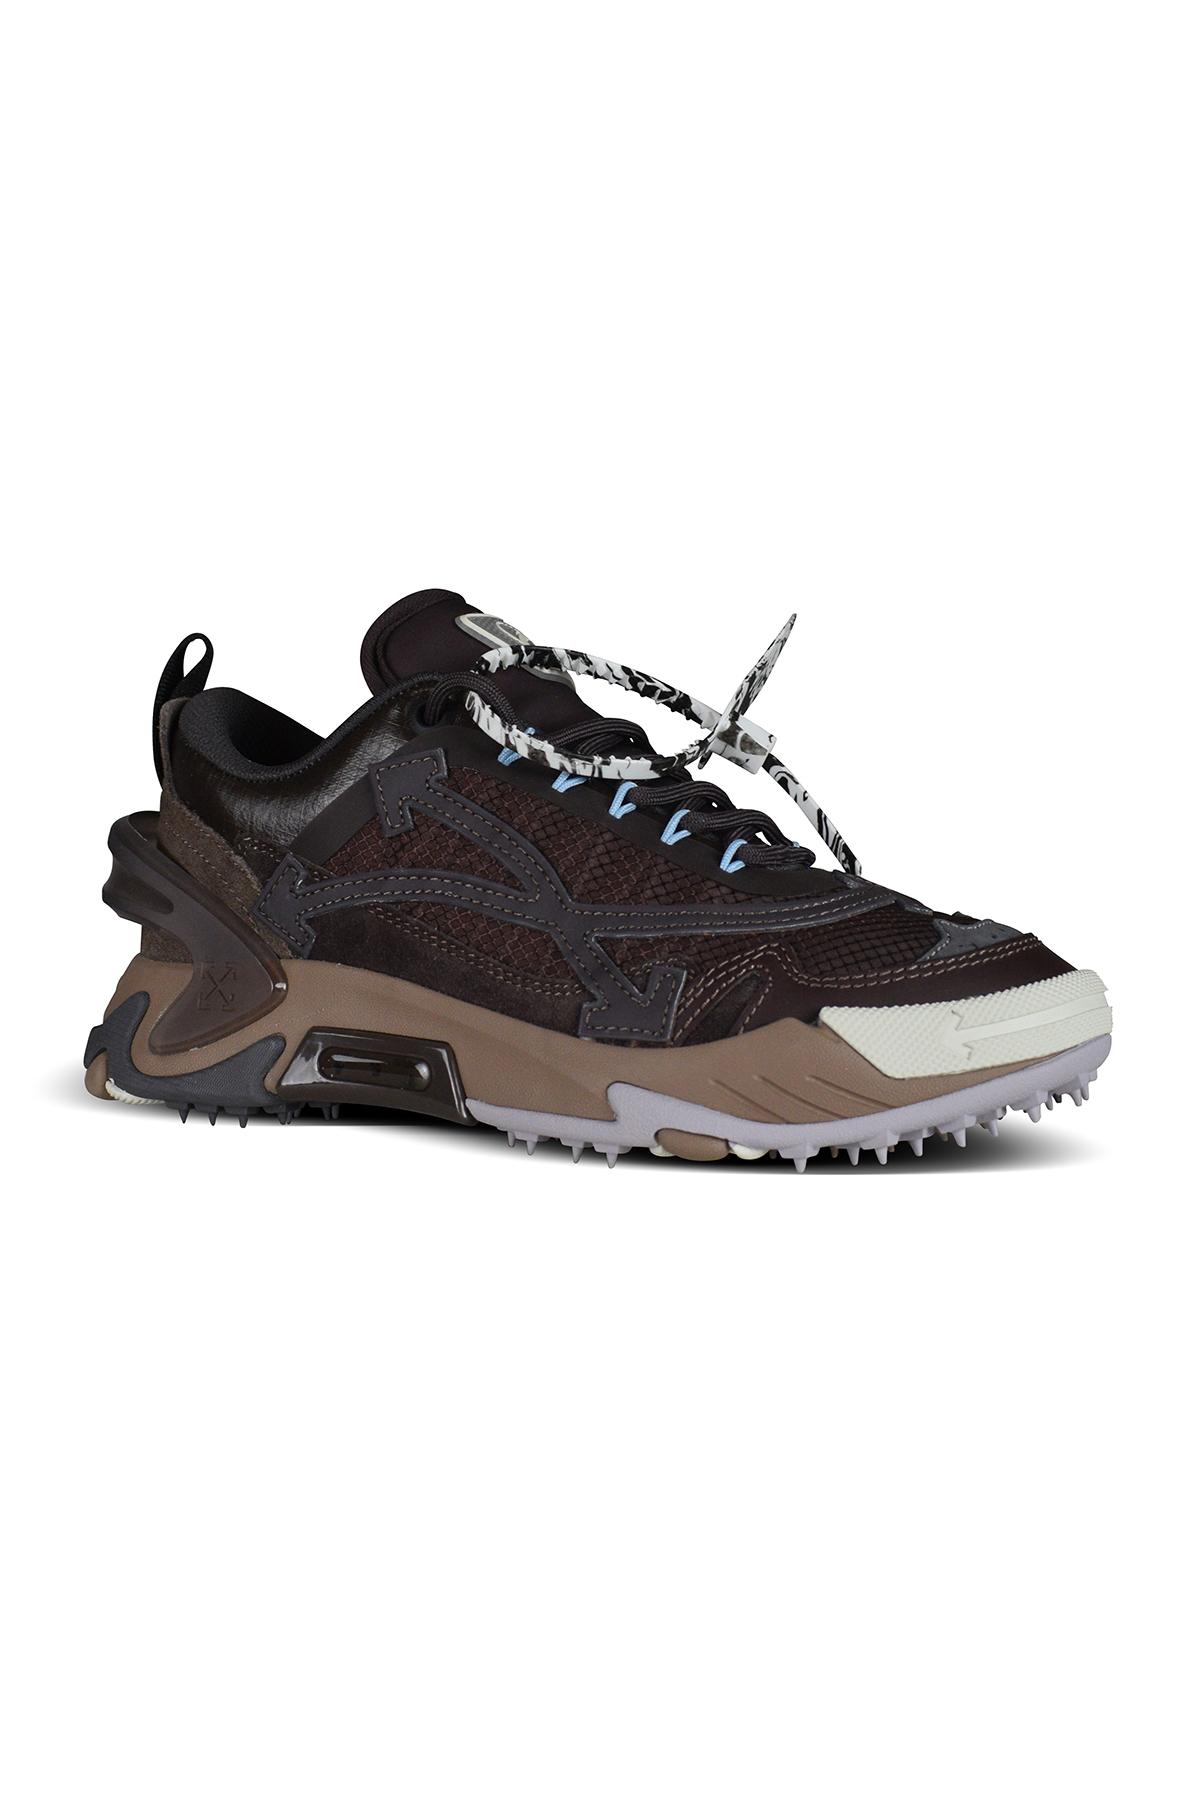 Off-White c/o Virgil Abloh Odsy-2000 Sneakers in Black | Lyst